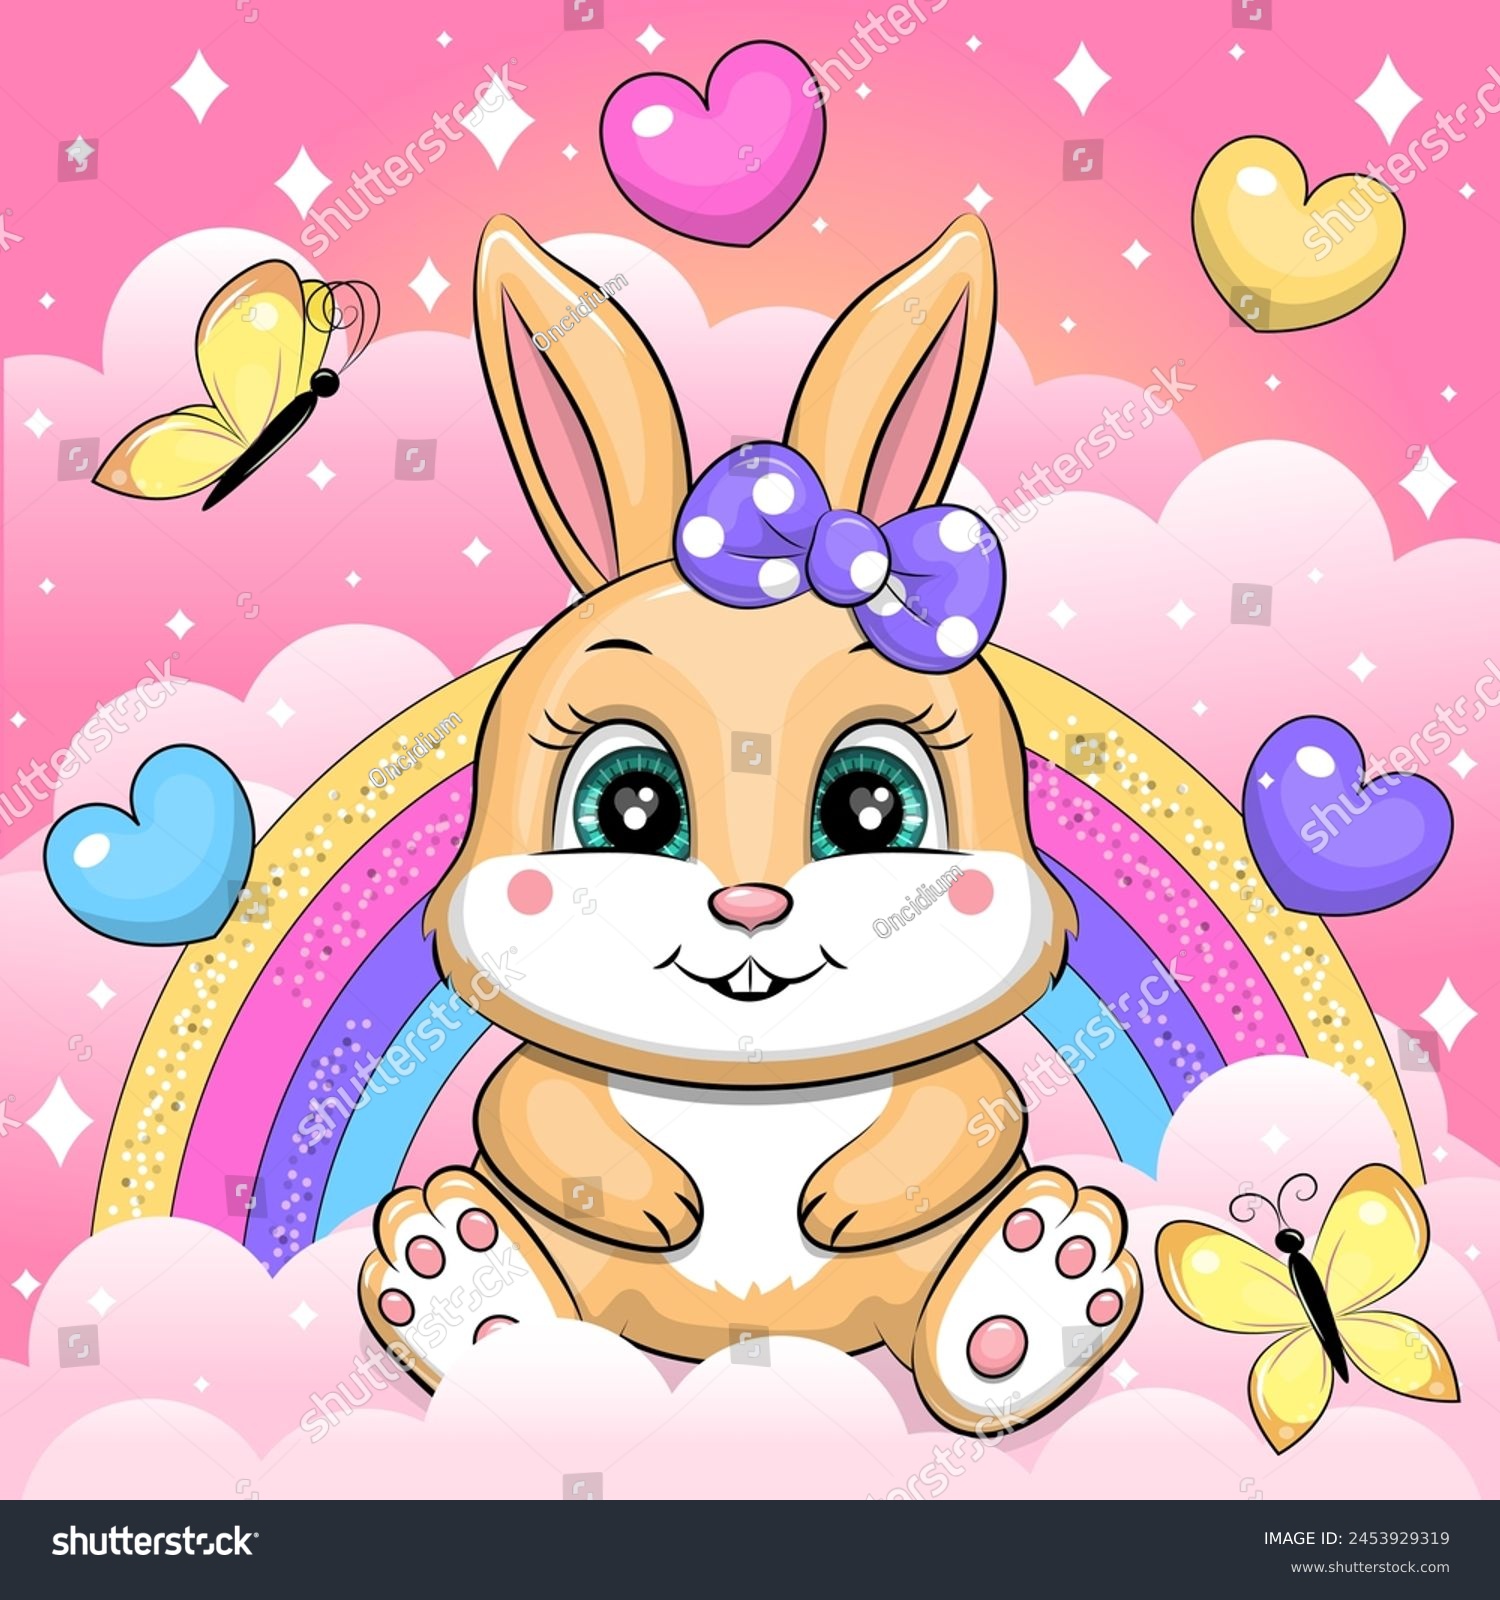 SVG of A cute cartoon bunny with a purple bow sits in the clouds. Vector illustration of an animal with butterflies, hearts, rainbow, clouds on a pink background. svg